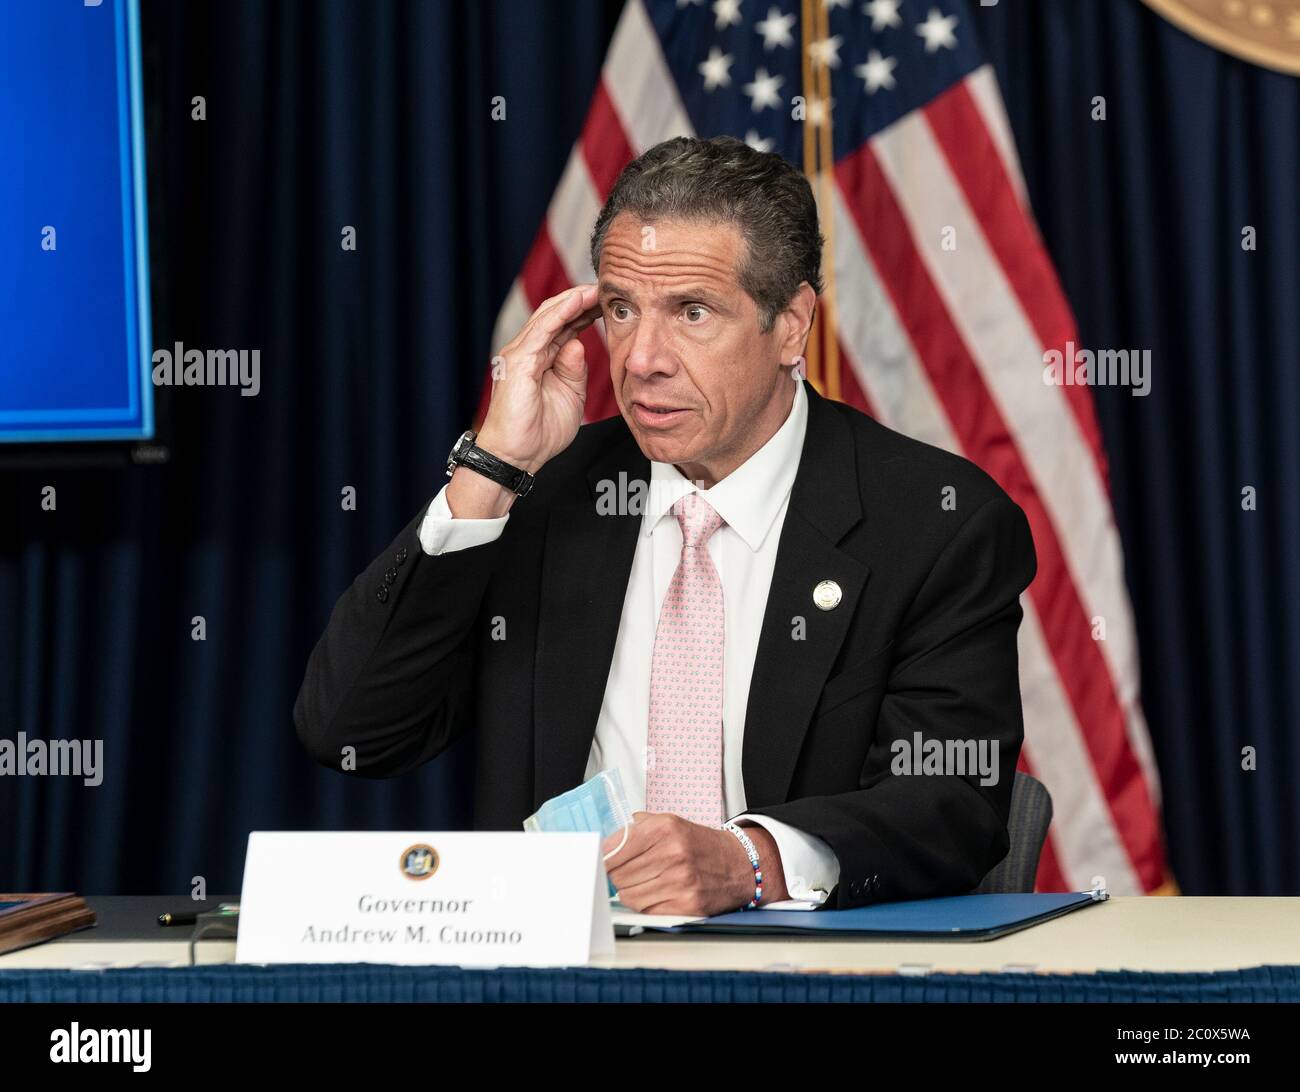 New York, United States. 12th June, 2020. Governor Andrew Cuomo speaks after signing 'Say Their Name' police reform agenda package at office on 633 3rd Avenue (Photo by Lev Radin/Pacific Press) Credit: Pacific Press Agency/Alamy Live News Stock Photo